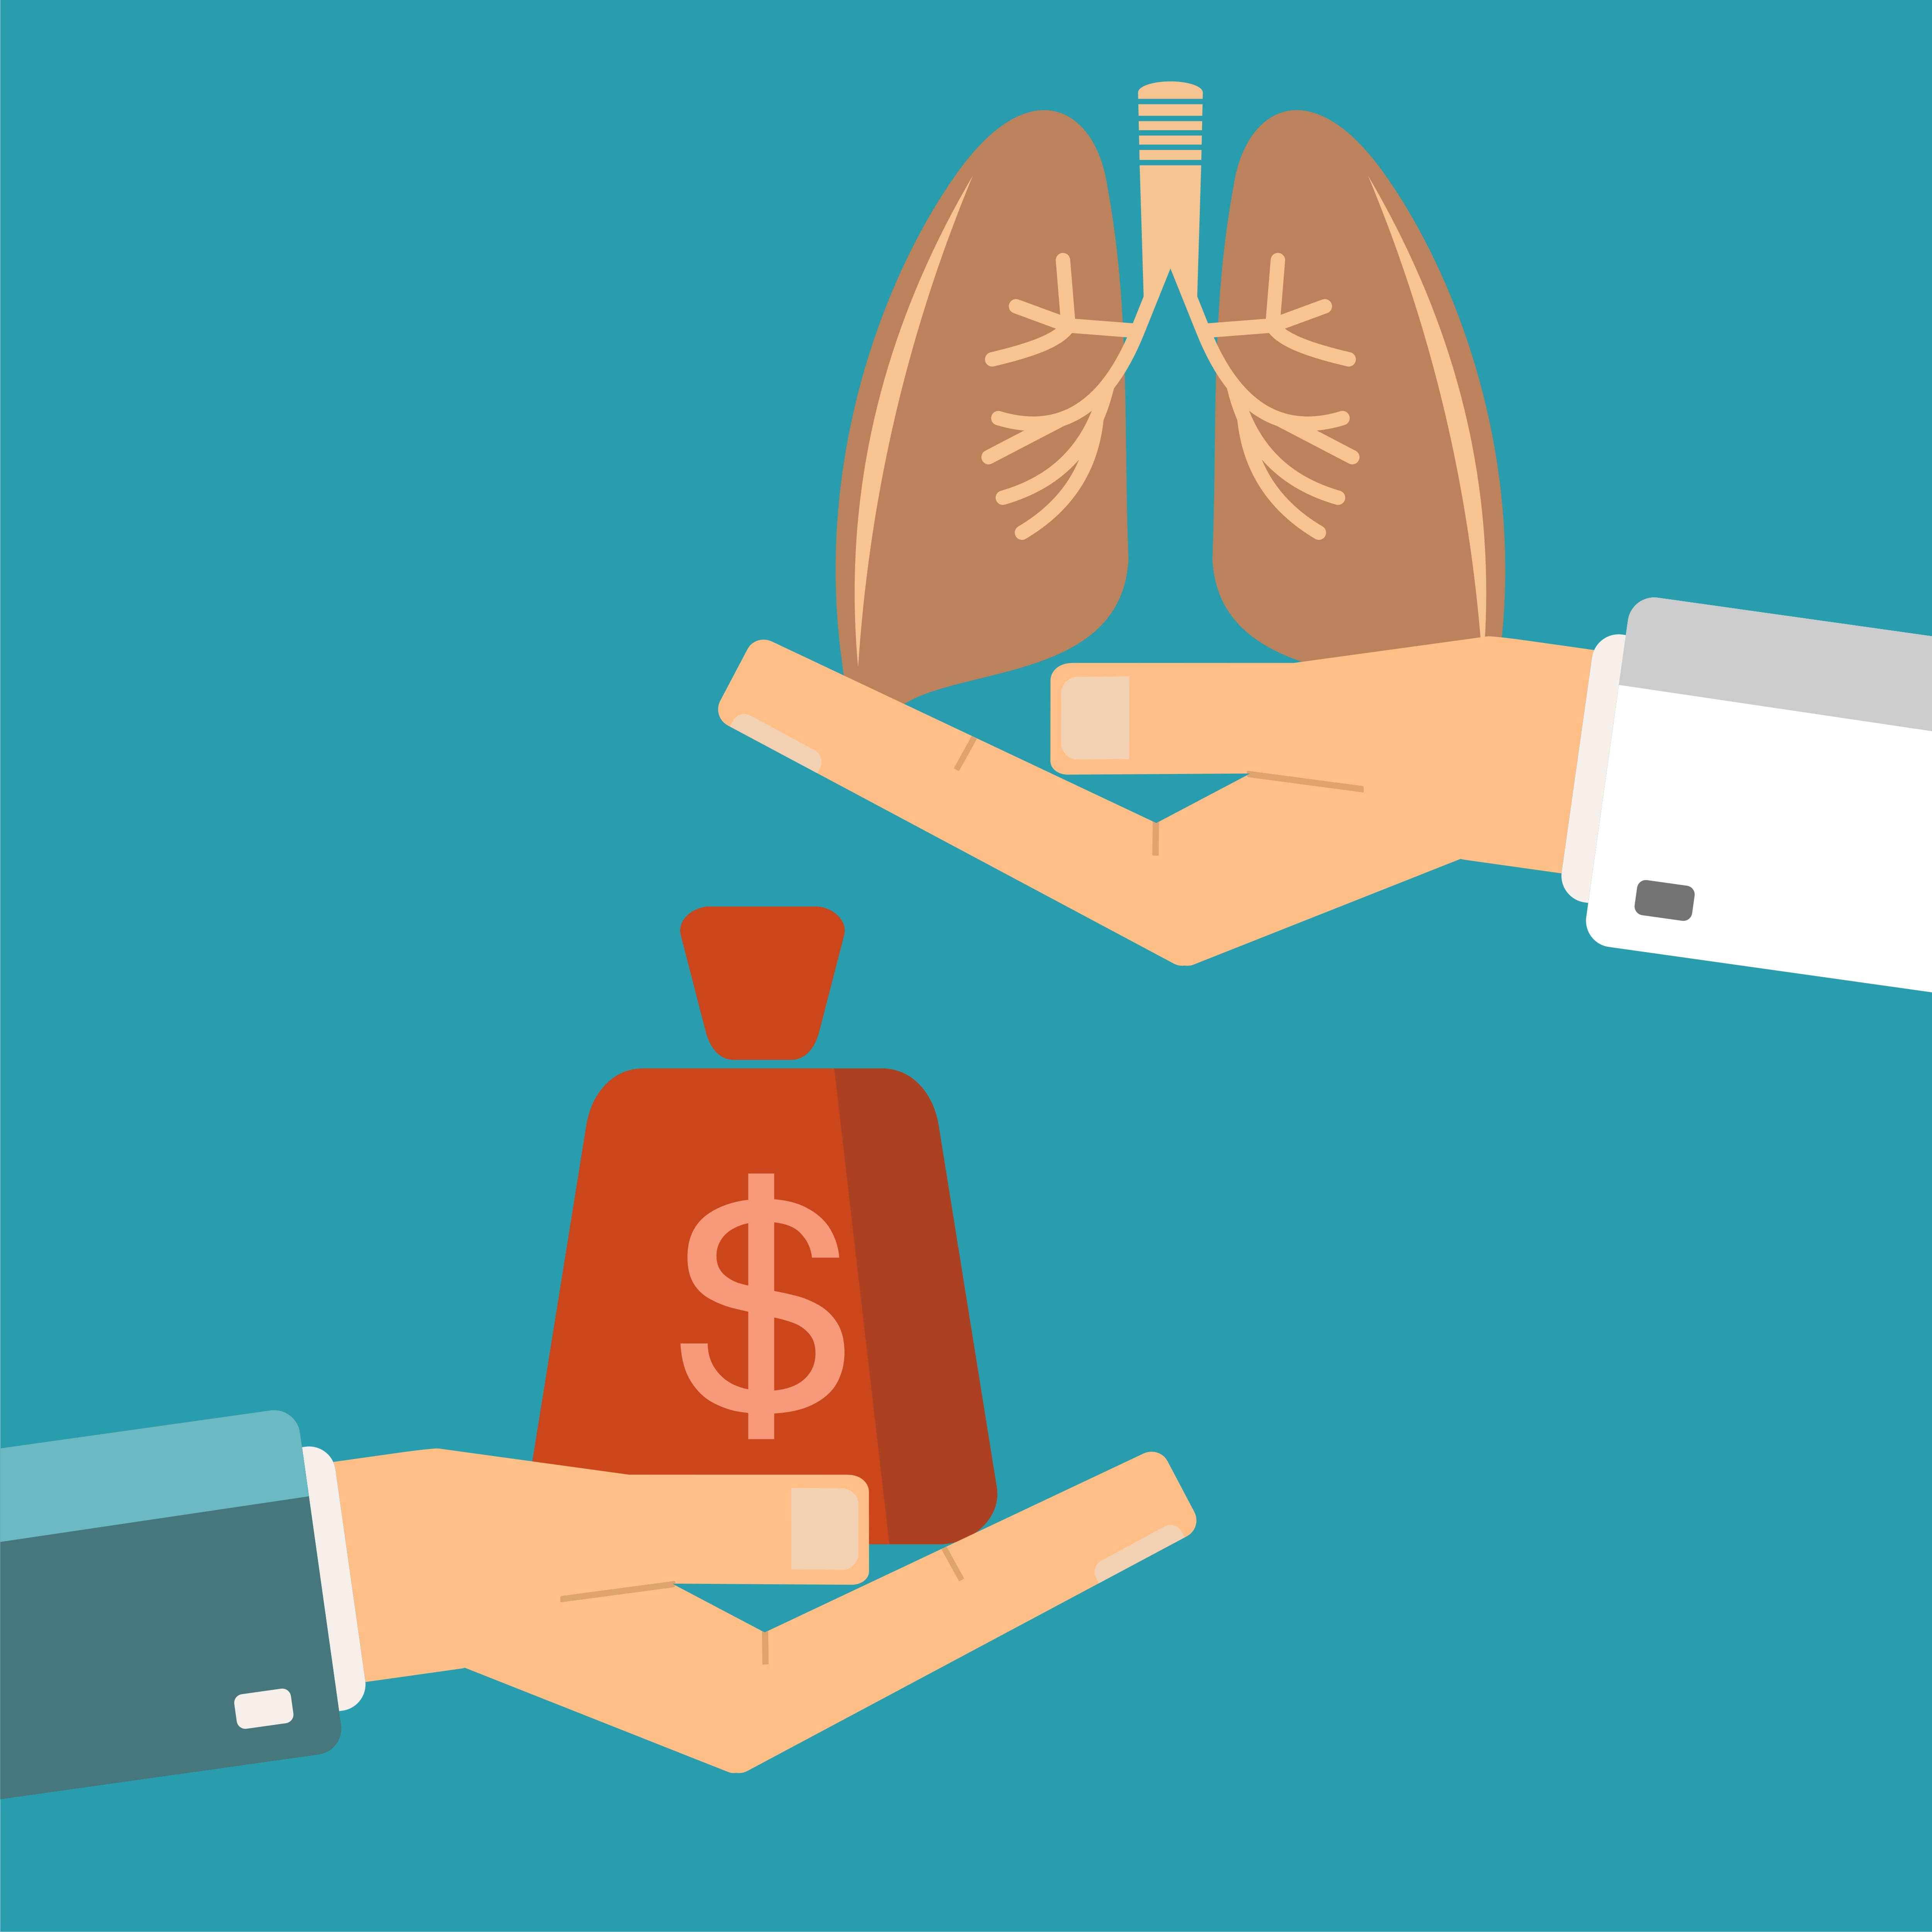 Money for lung health